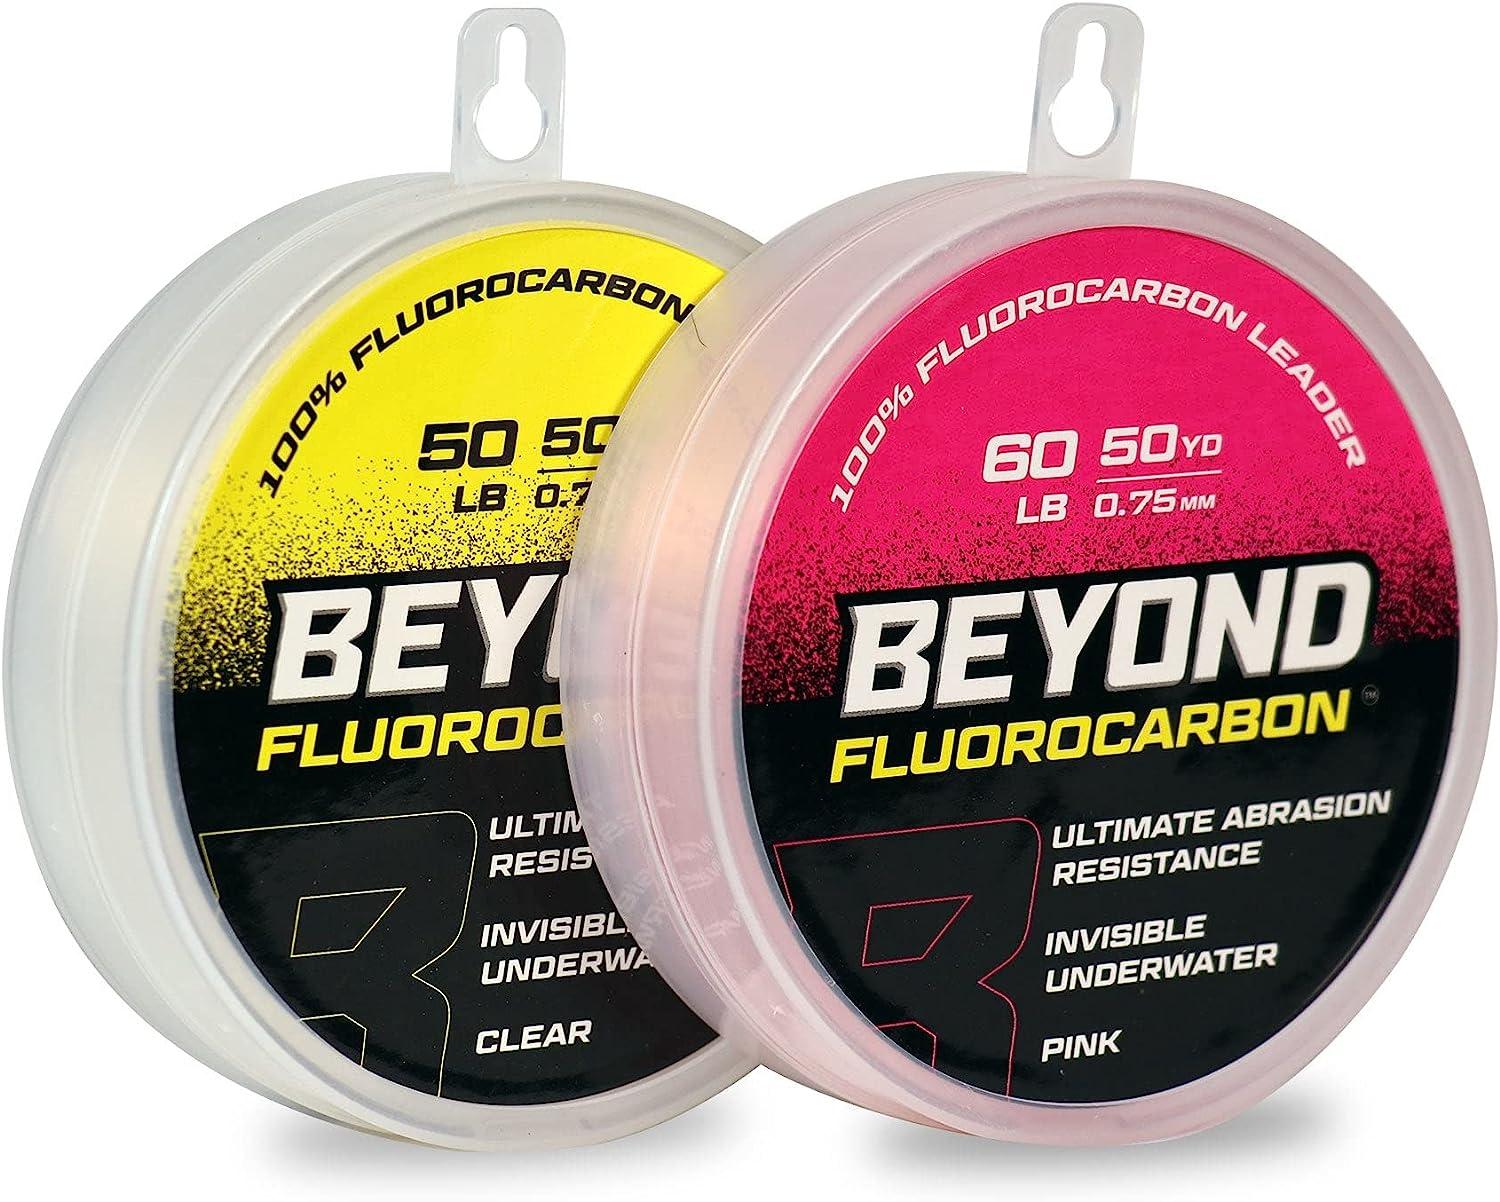 Beyond Fluorocarbon Leader Fishing Line - 100% Pure Fluorocarbon Leader  Material - Highly Abrasion Reistant - Invisible Underwater- Shock Resistant  - Incredible Knot Strength 50 Yard Spool Clear 40LB